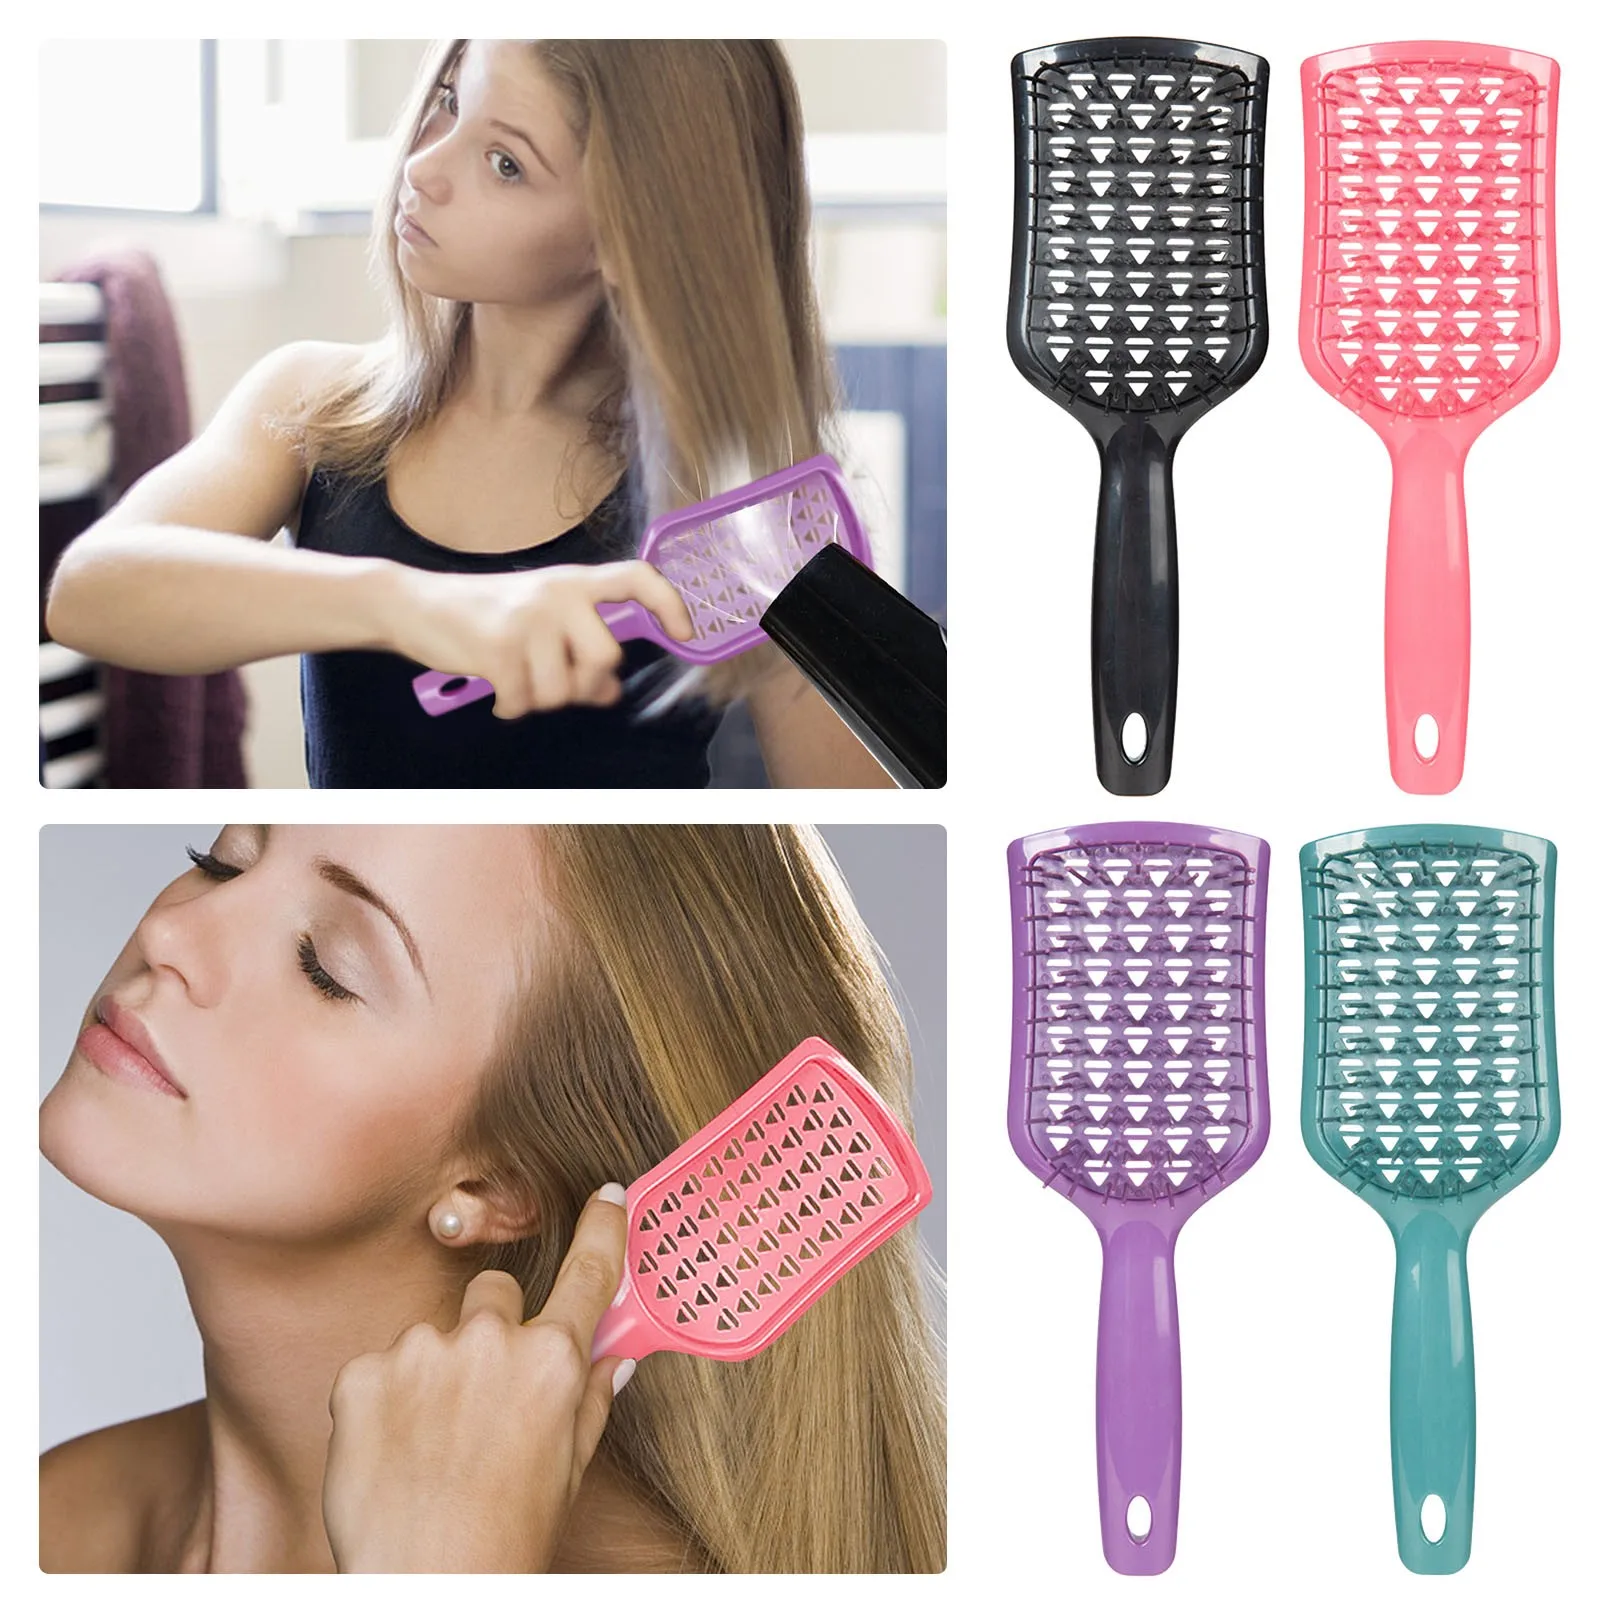 1Pcs Detangling Scalp Comb Untwisted Hair Brush With Flexible Anti Static Massage Brush For Combing Of Wet And Dry Curly Hair 1920 1080p usb endoscope camera for android phone laptop with 8mm lens flexible cable type c endoscope inspect borescope